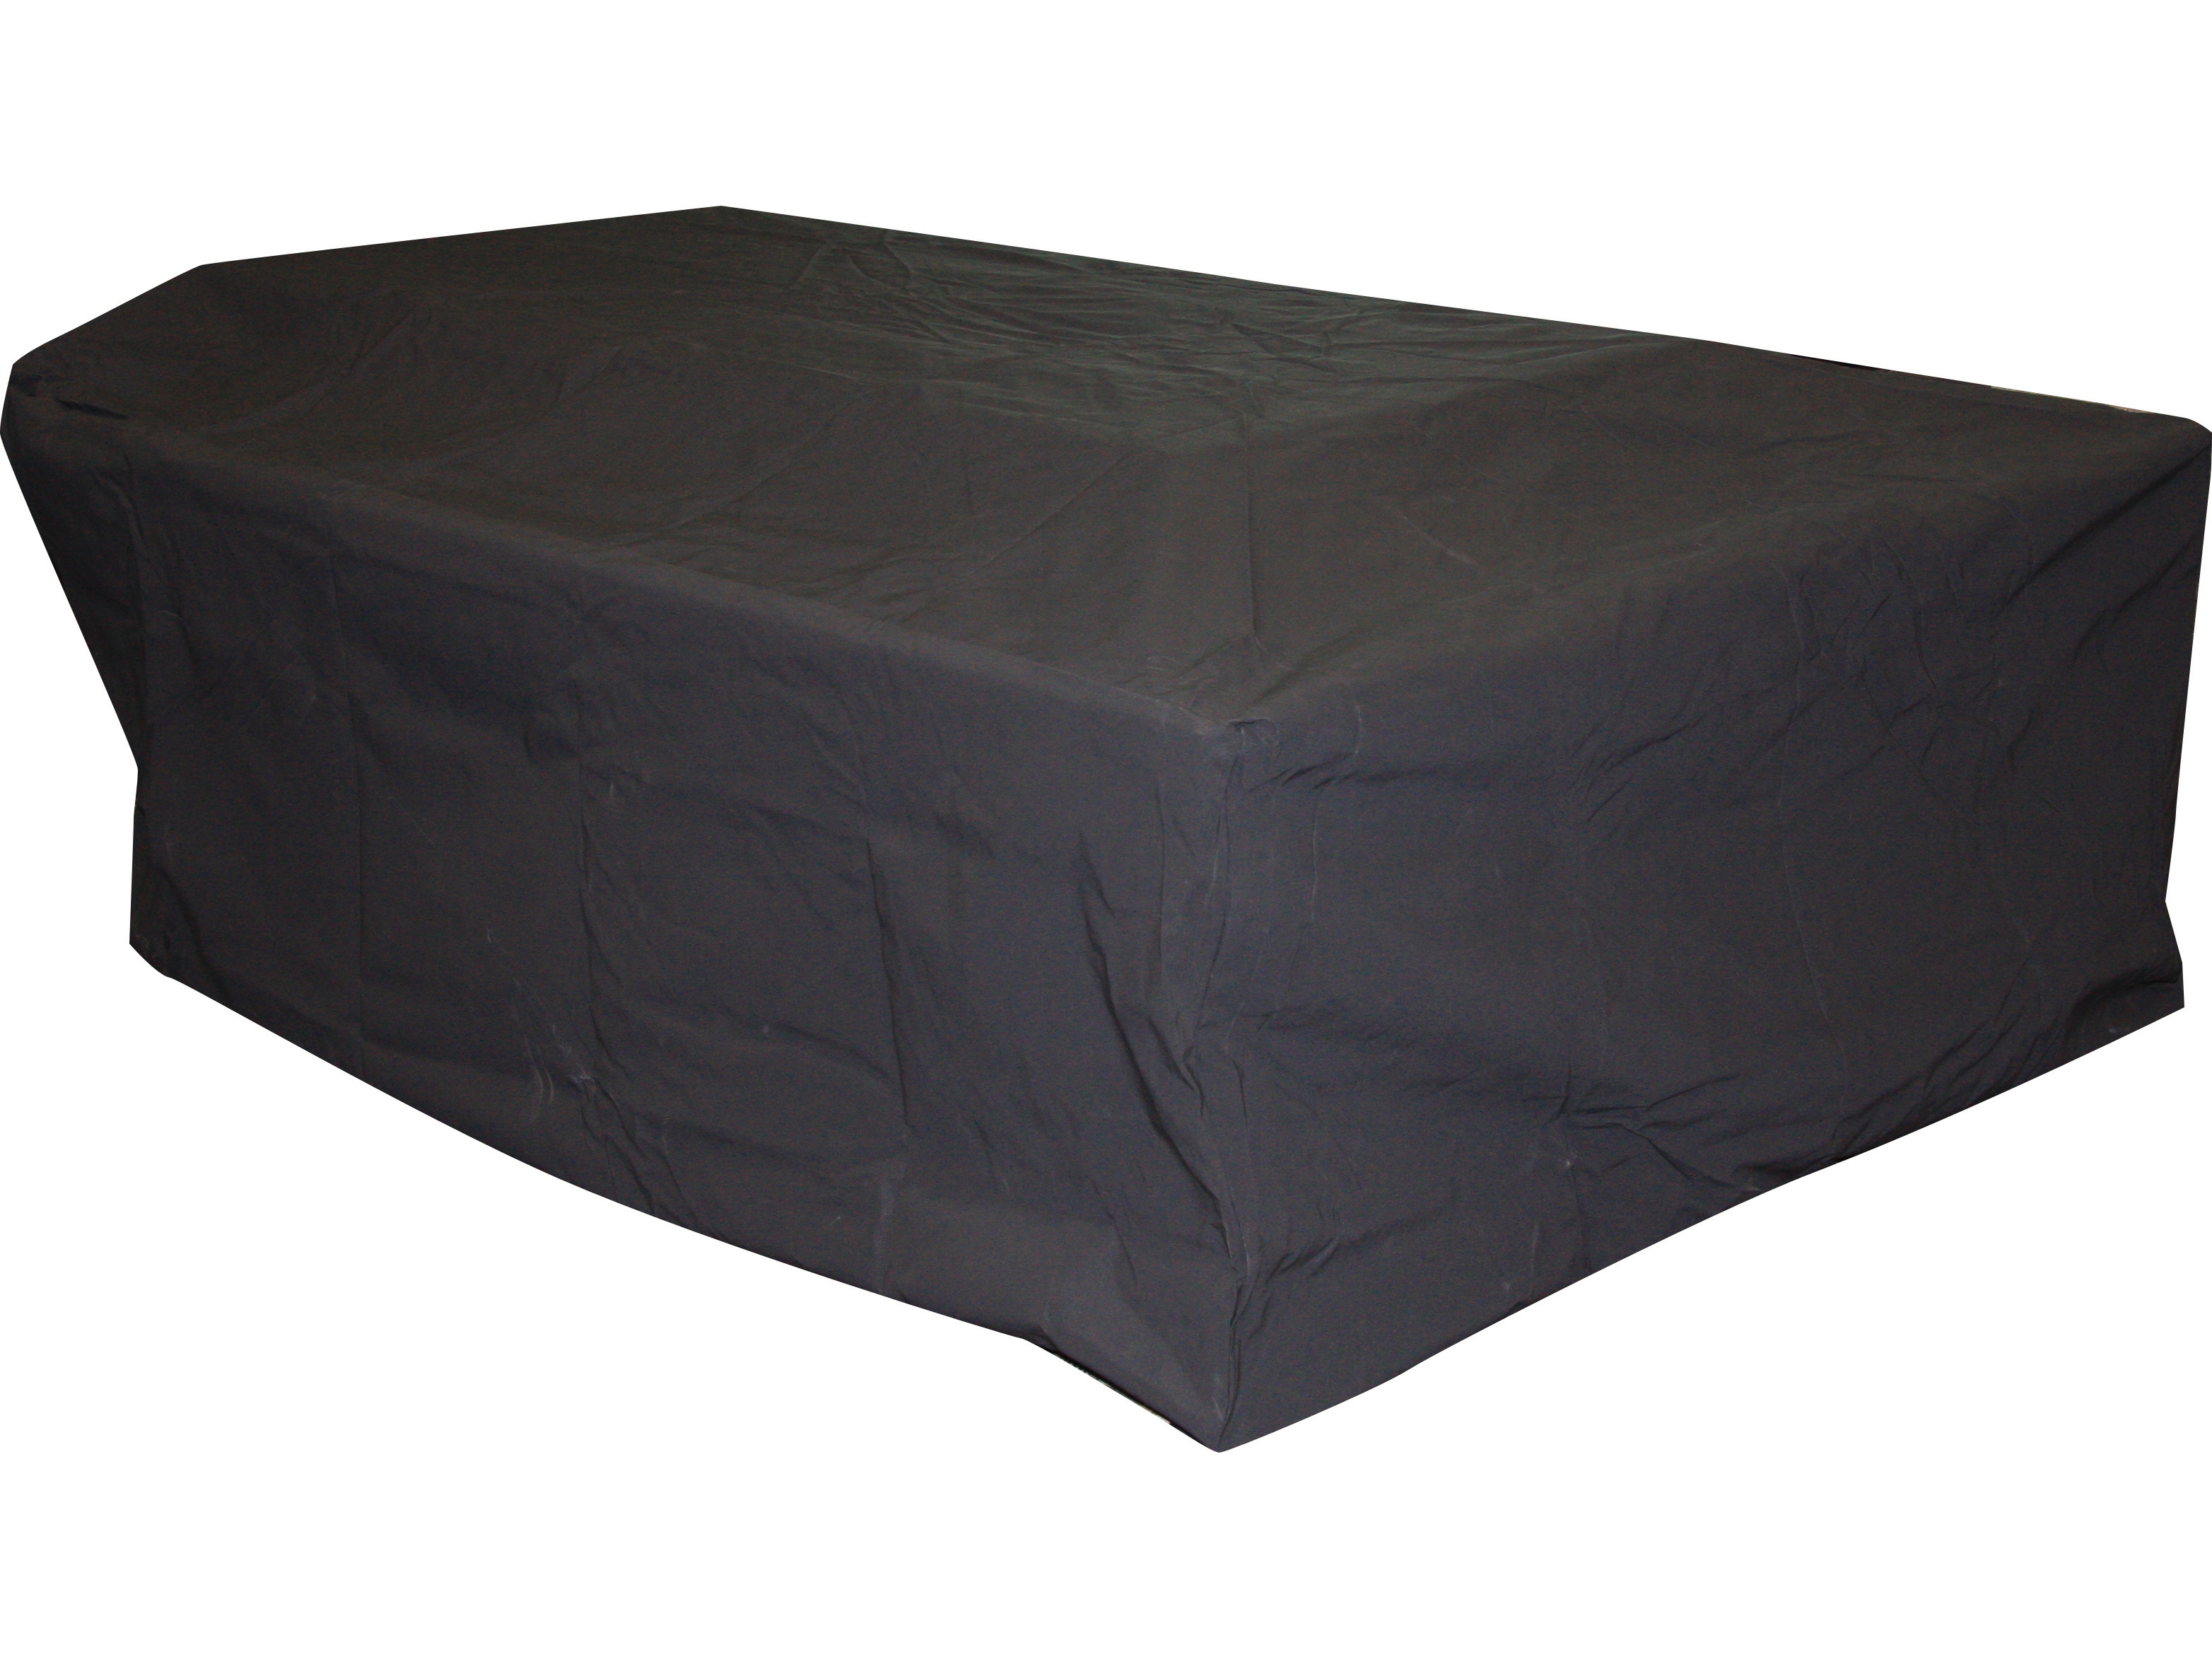 Homecrest 52 X 32 Rectangular Fire Table Cover pertaining to measurements 3129 X 2347